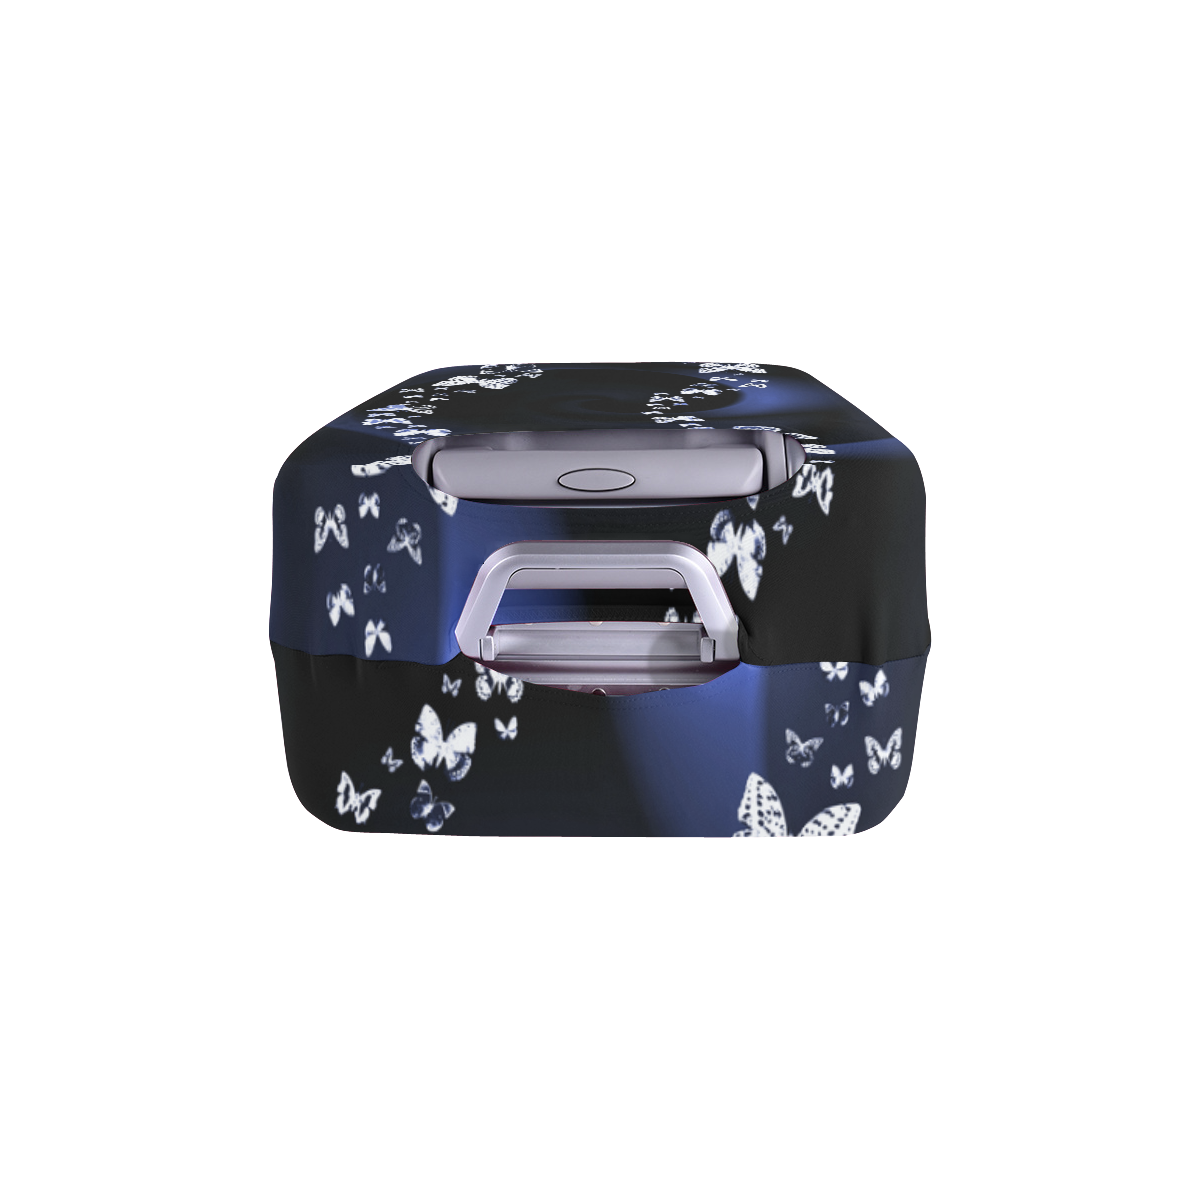 Blue Butterfly Swirl Luggage Cover/Large 26"-28"